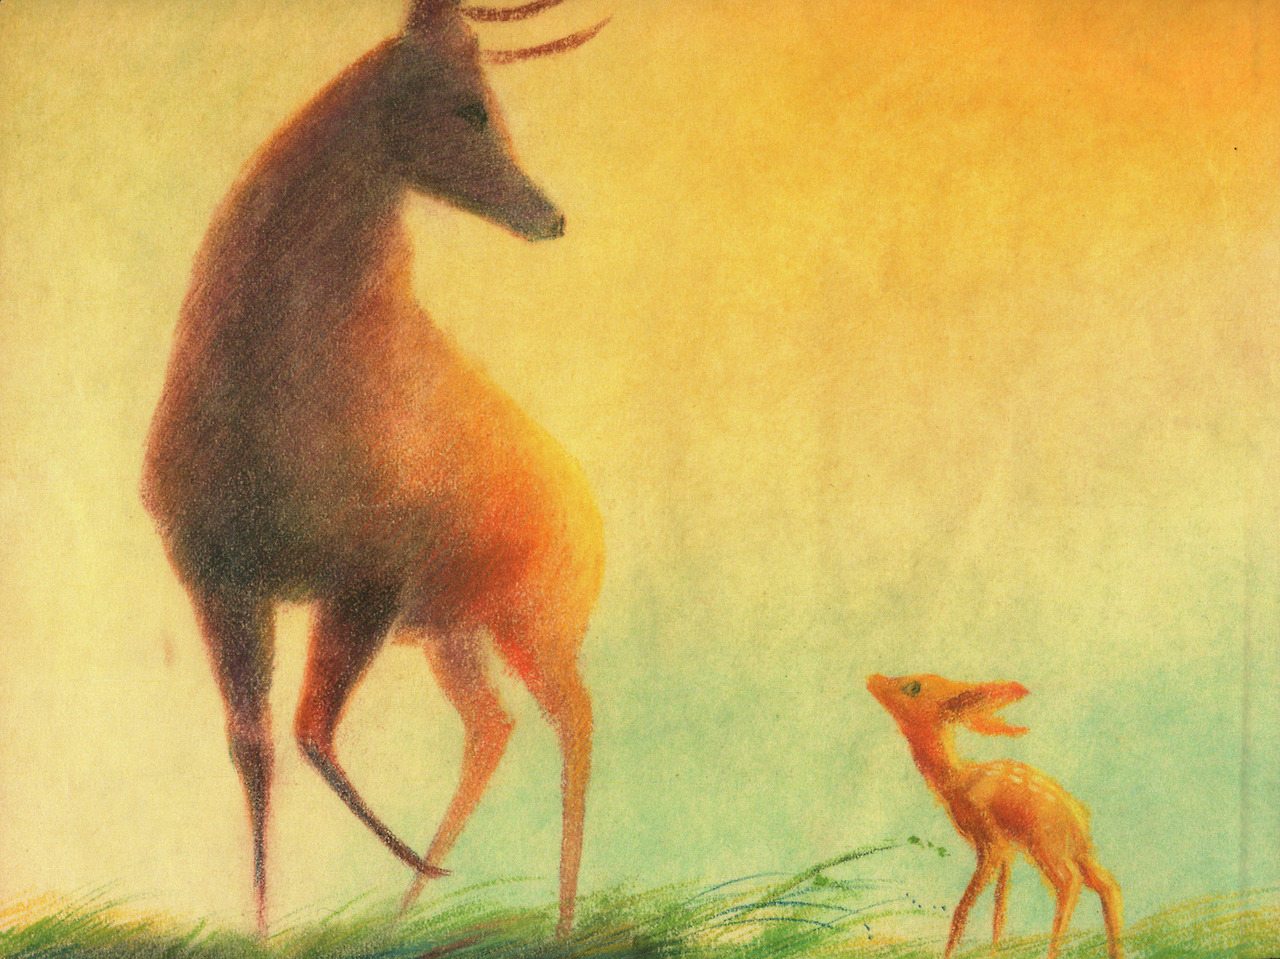 "Bambi" concept by Tyrus Wong.